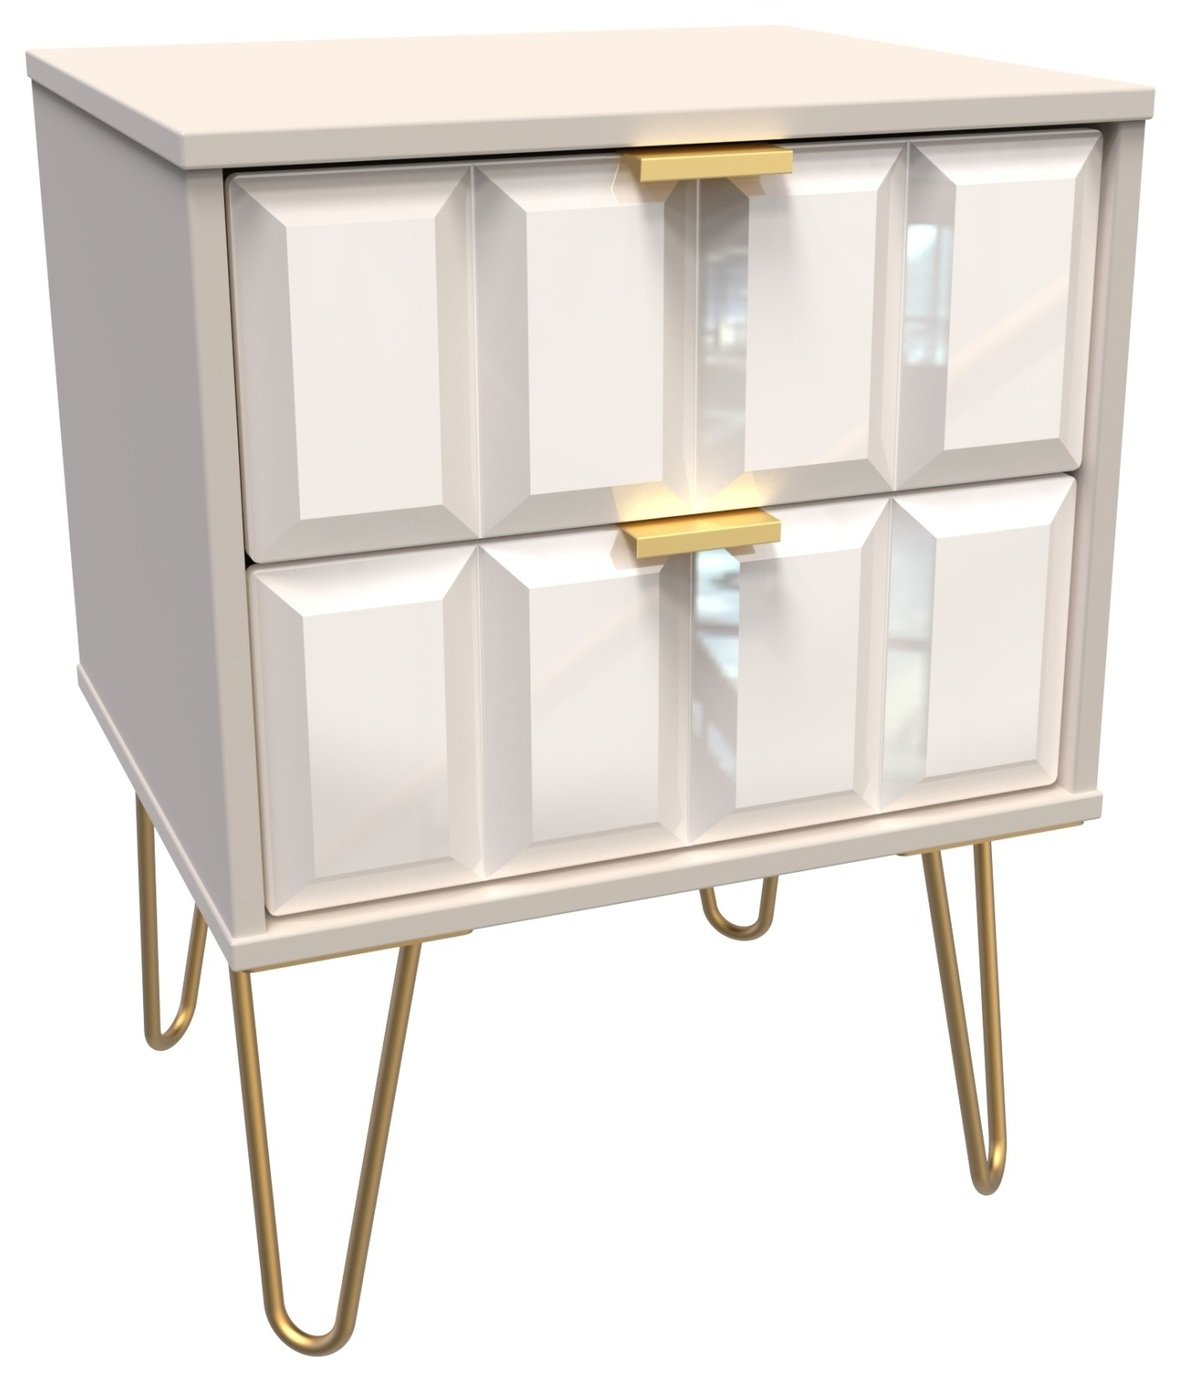 Calvello 2 Drawer Charge Bedside Table - Off White